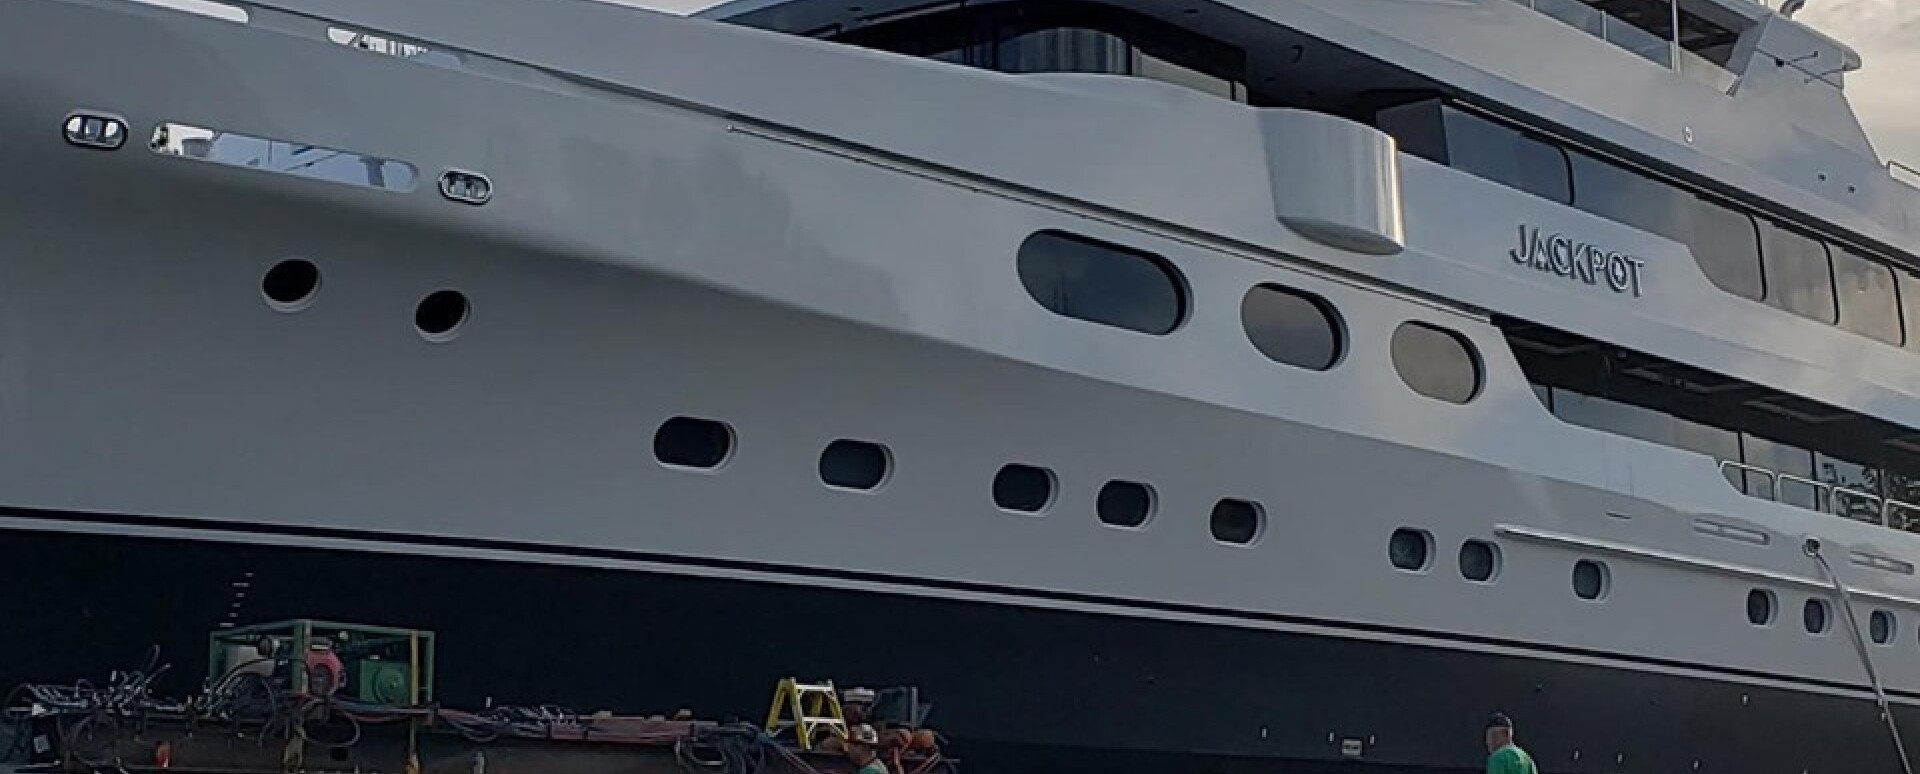                                                                                                     Christensen launch 50-metre M/Y Jackpot in advance of move to new yard
                                                                                            